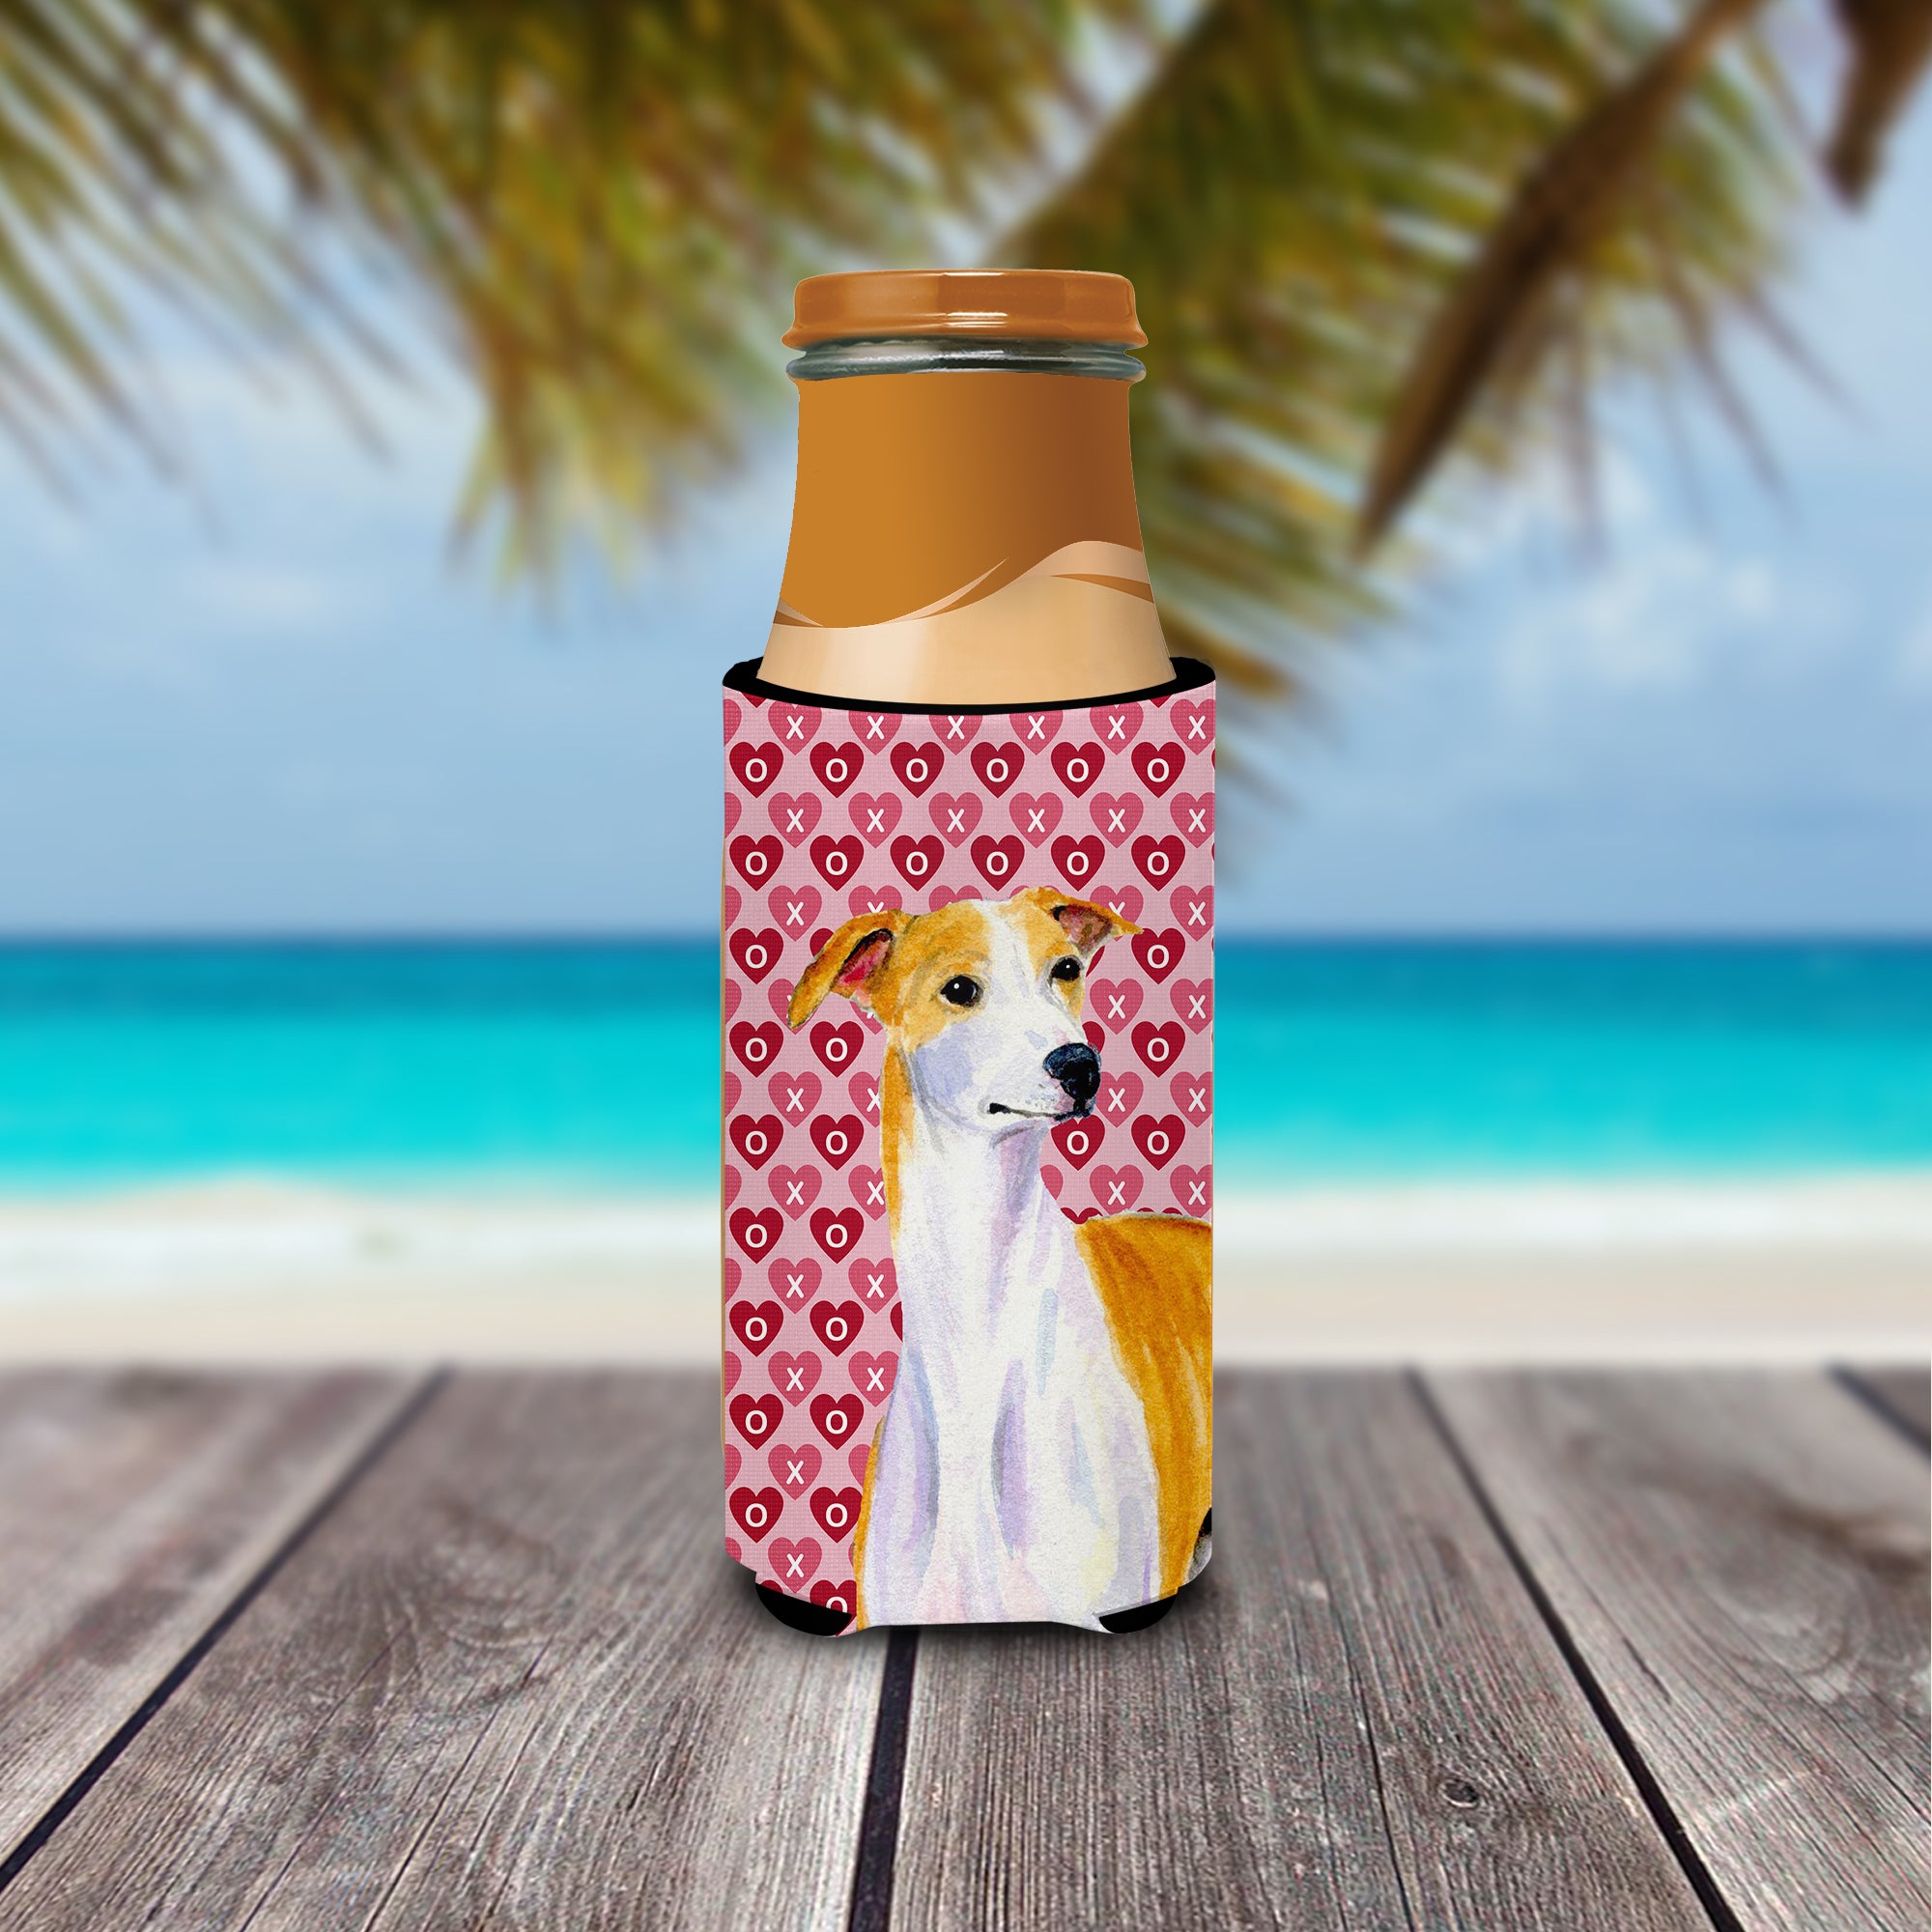 Whippet Hearts Love and Valentine's Day Portrait Ultra Beverage Isolateurs pour canettes minces LH9148MUK